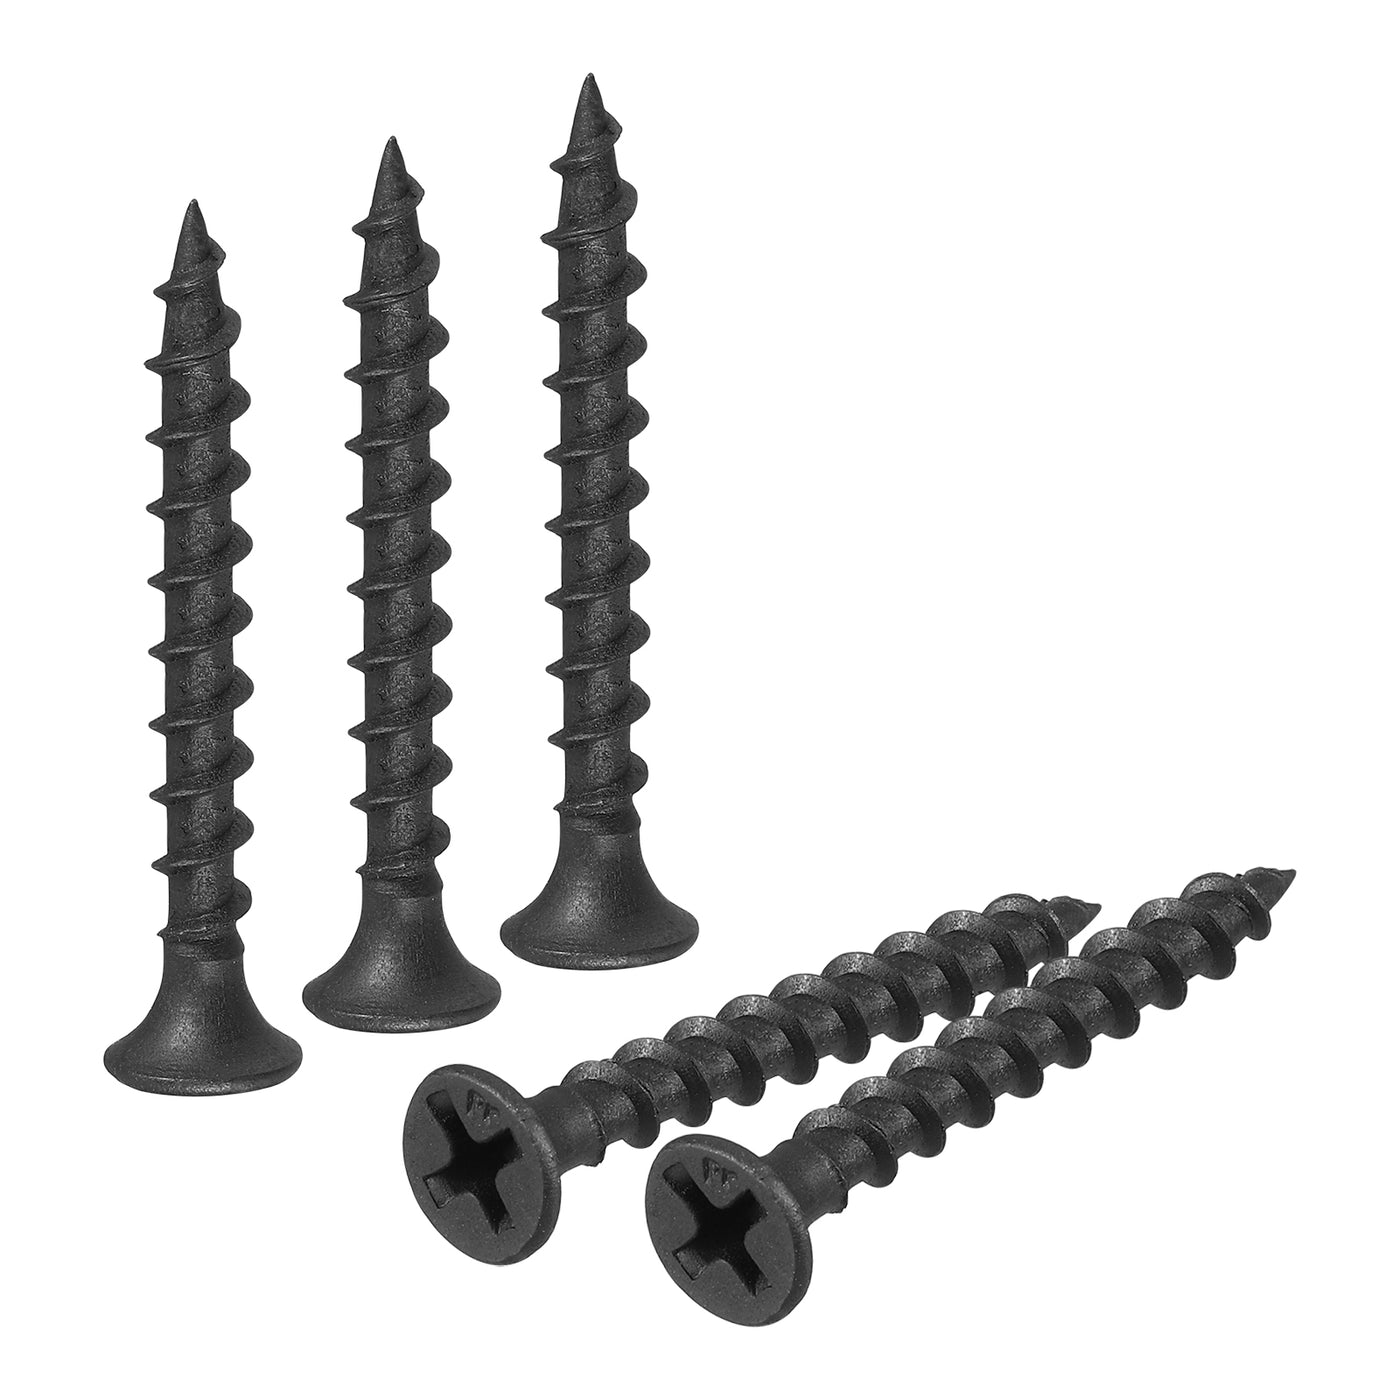 uxcell Uxcell M3.8x35mm 150pcs Phillips Drive Wood Screws, Carbon Steel Self Tapping Screws